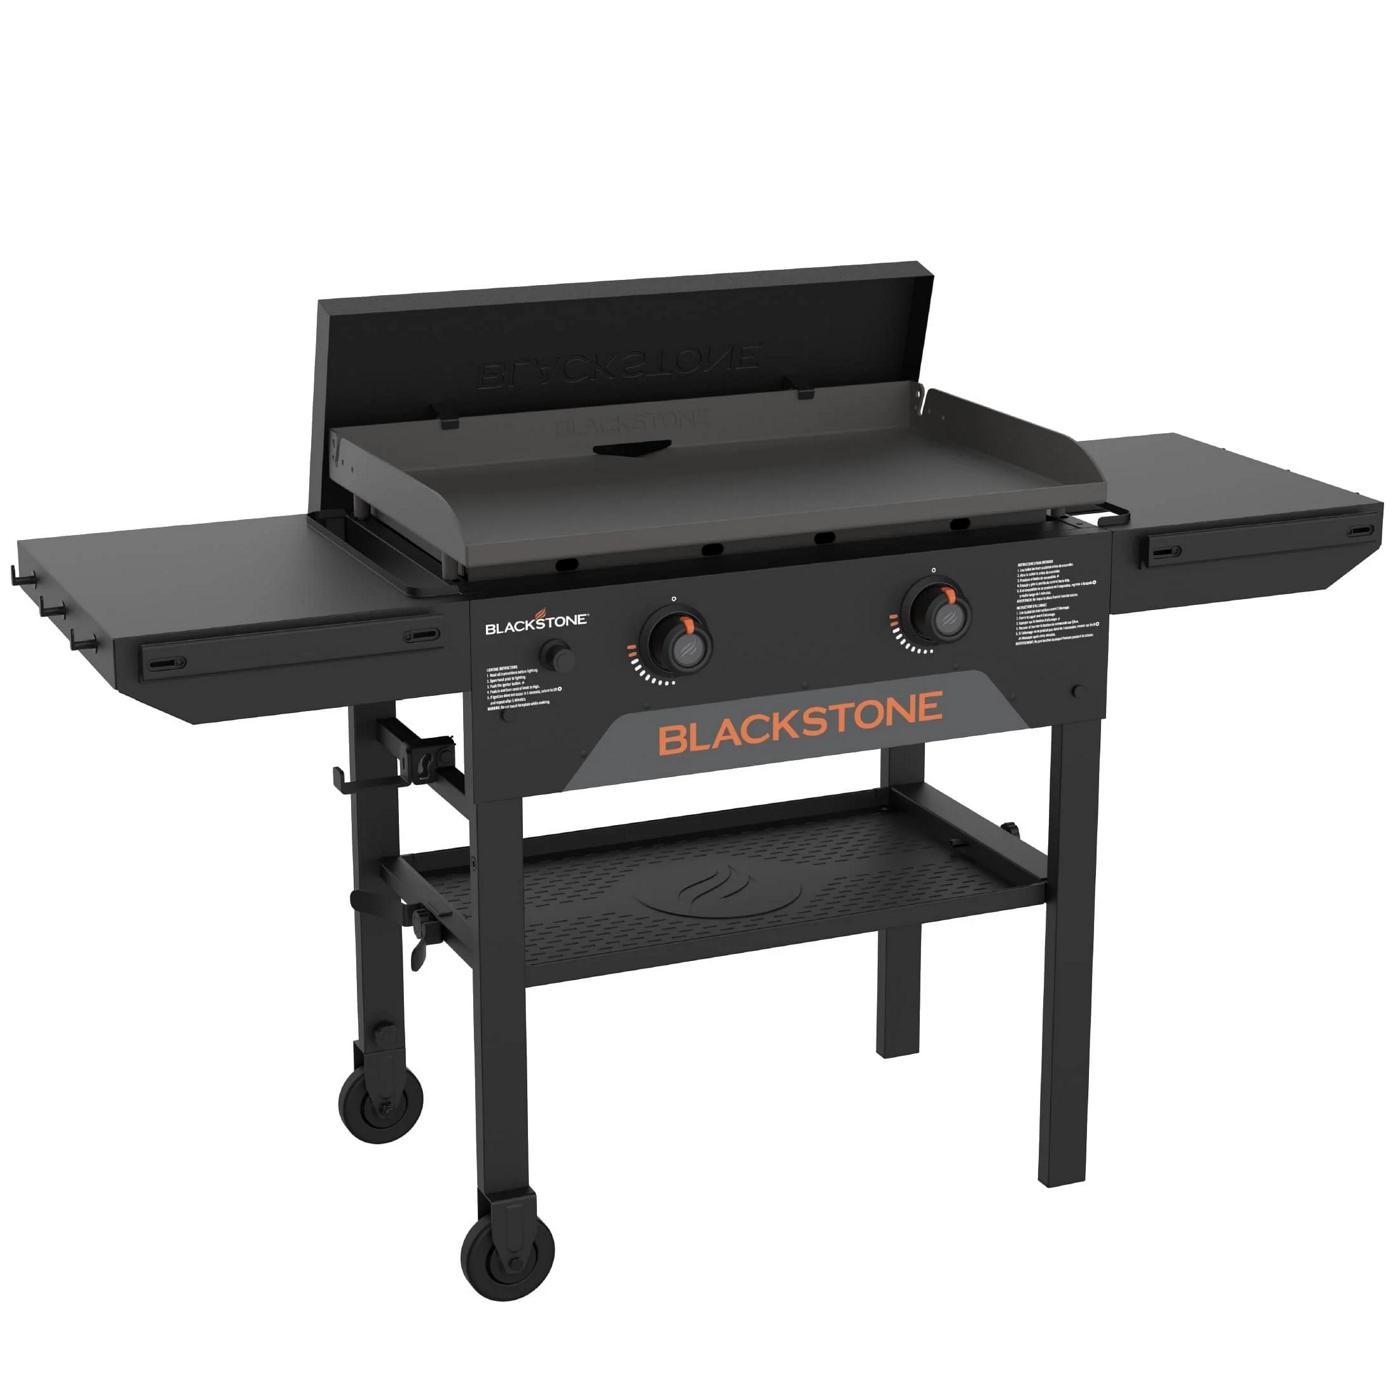 Blackstone Omnivore Griddle with Hard Cover; image 1 of 7